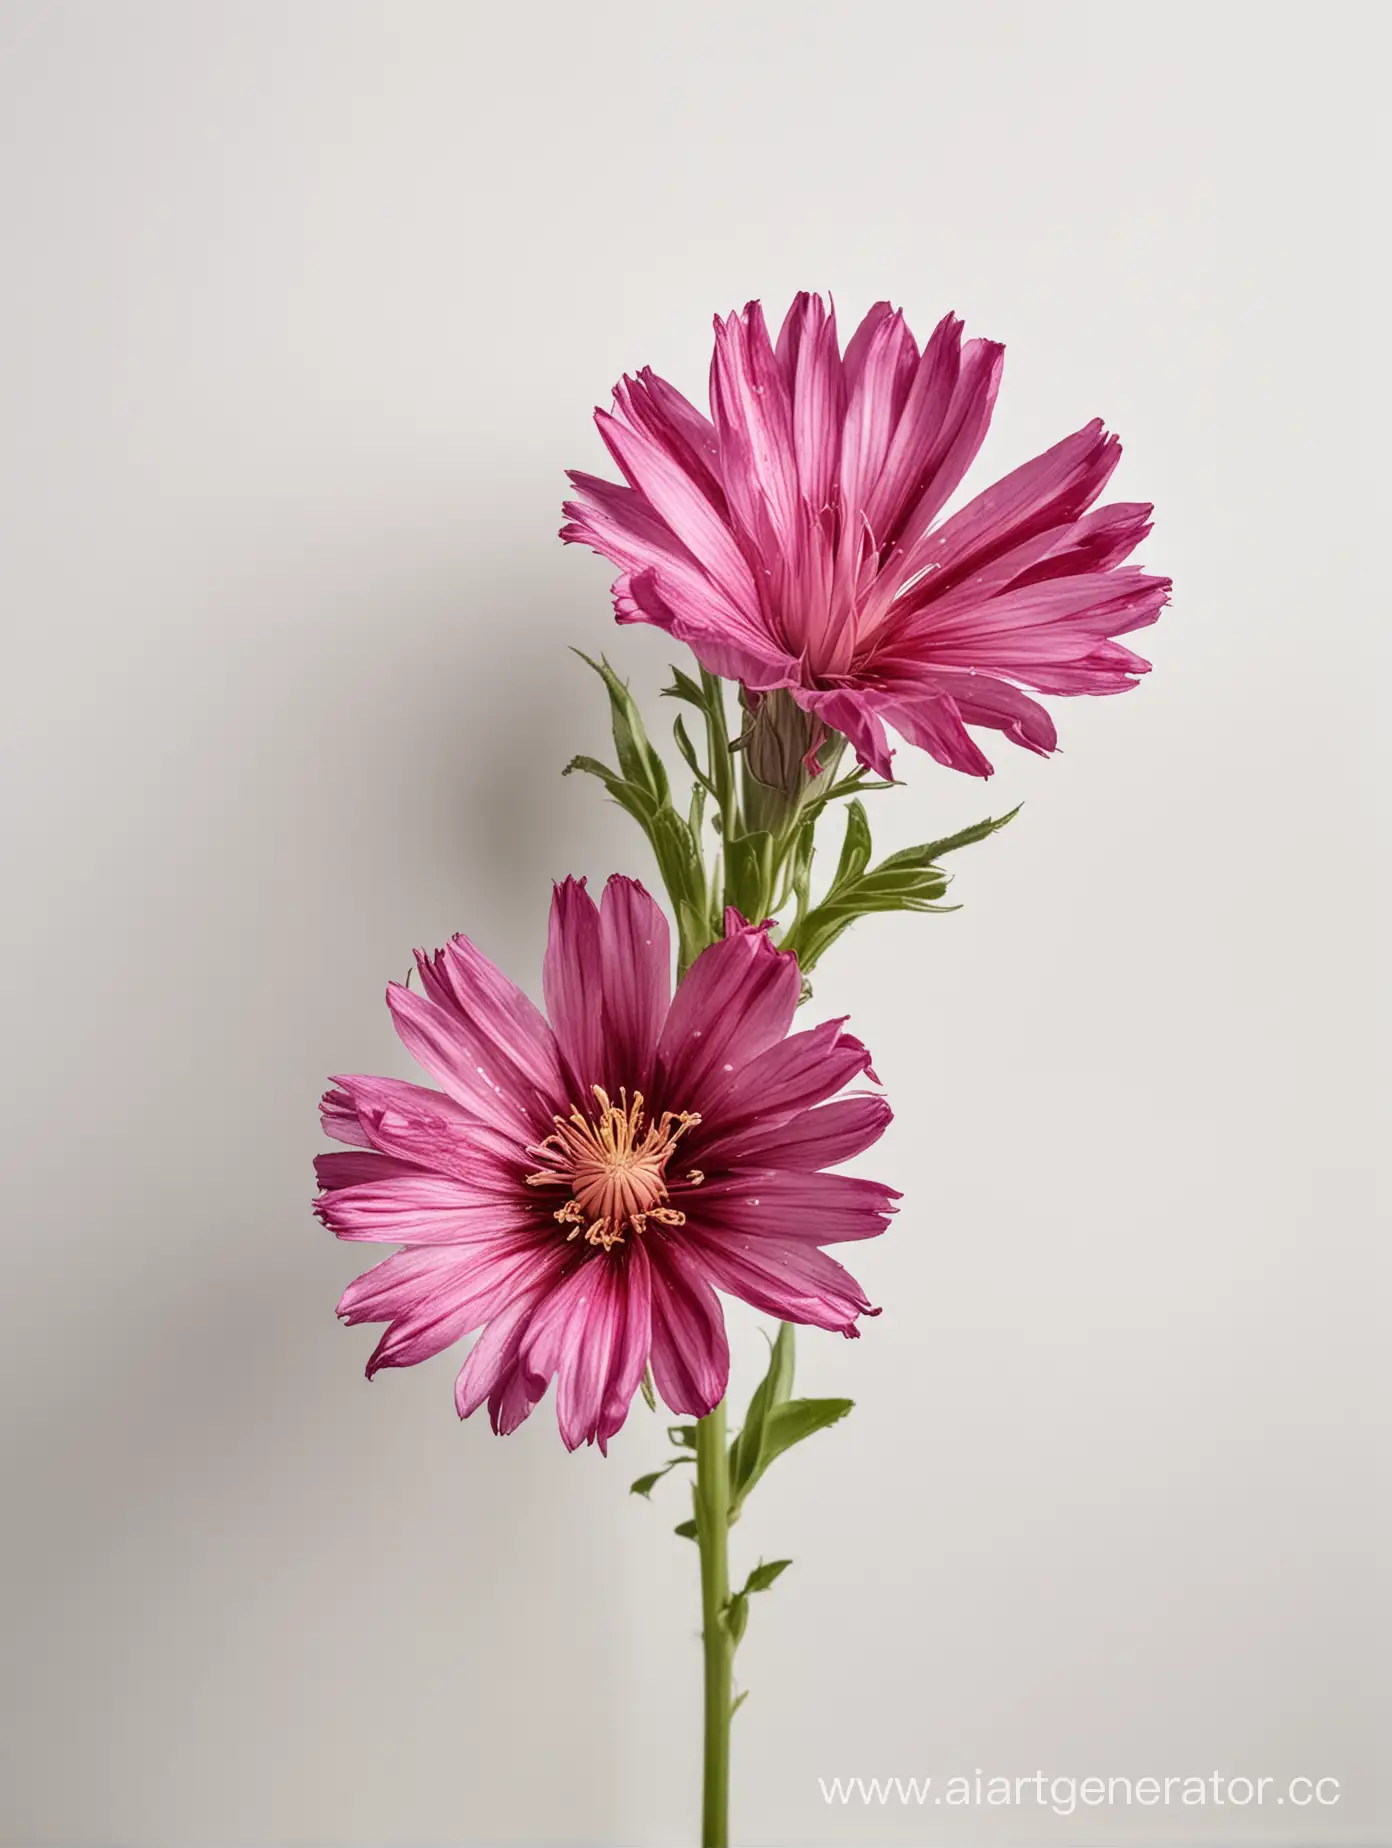 Vibrant-Red-Chicory-Flower-Blooming-Against-Clean-White-Background